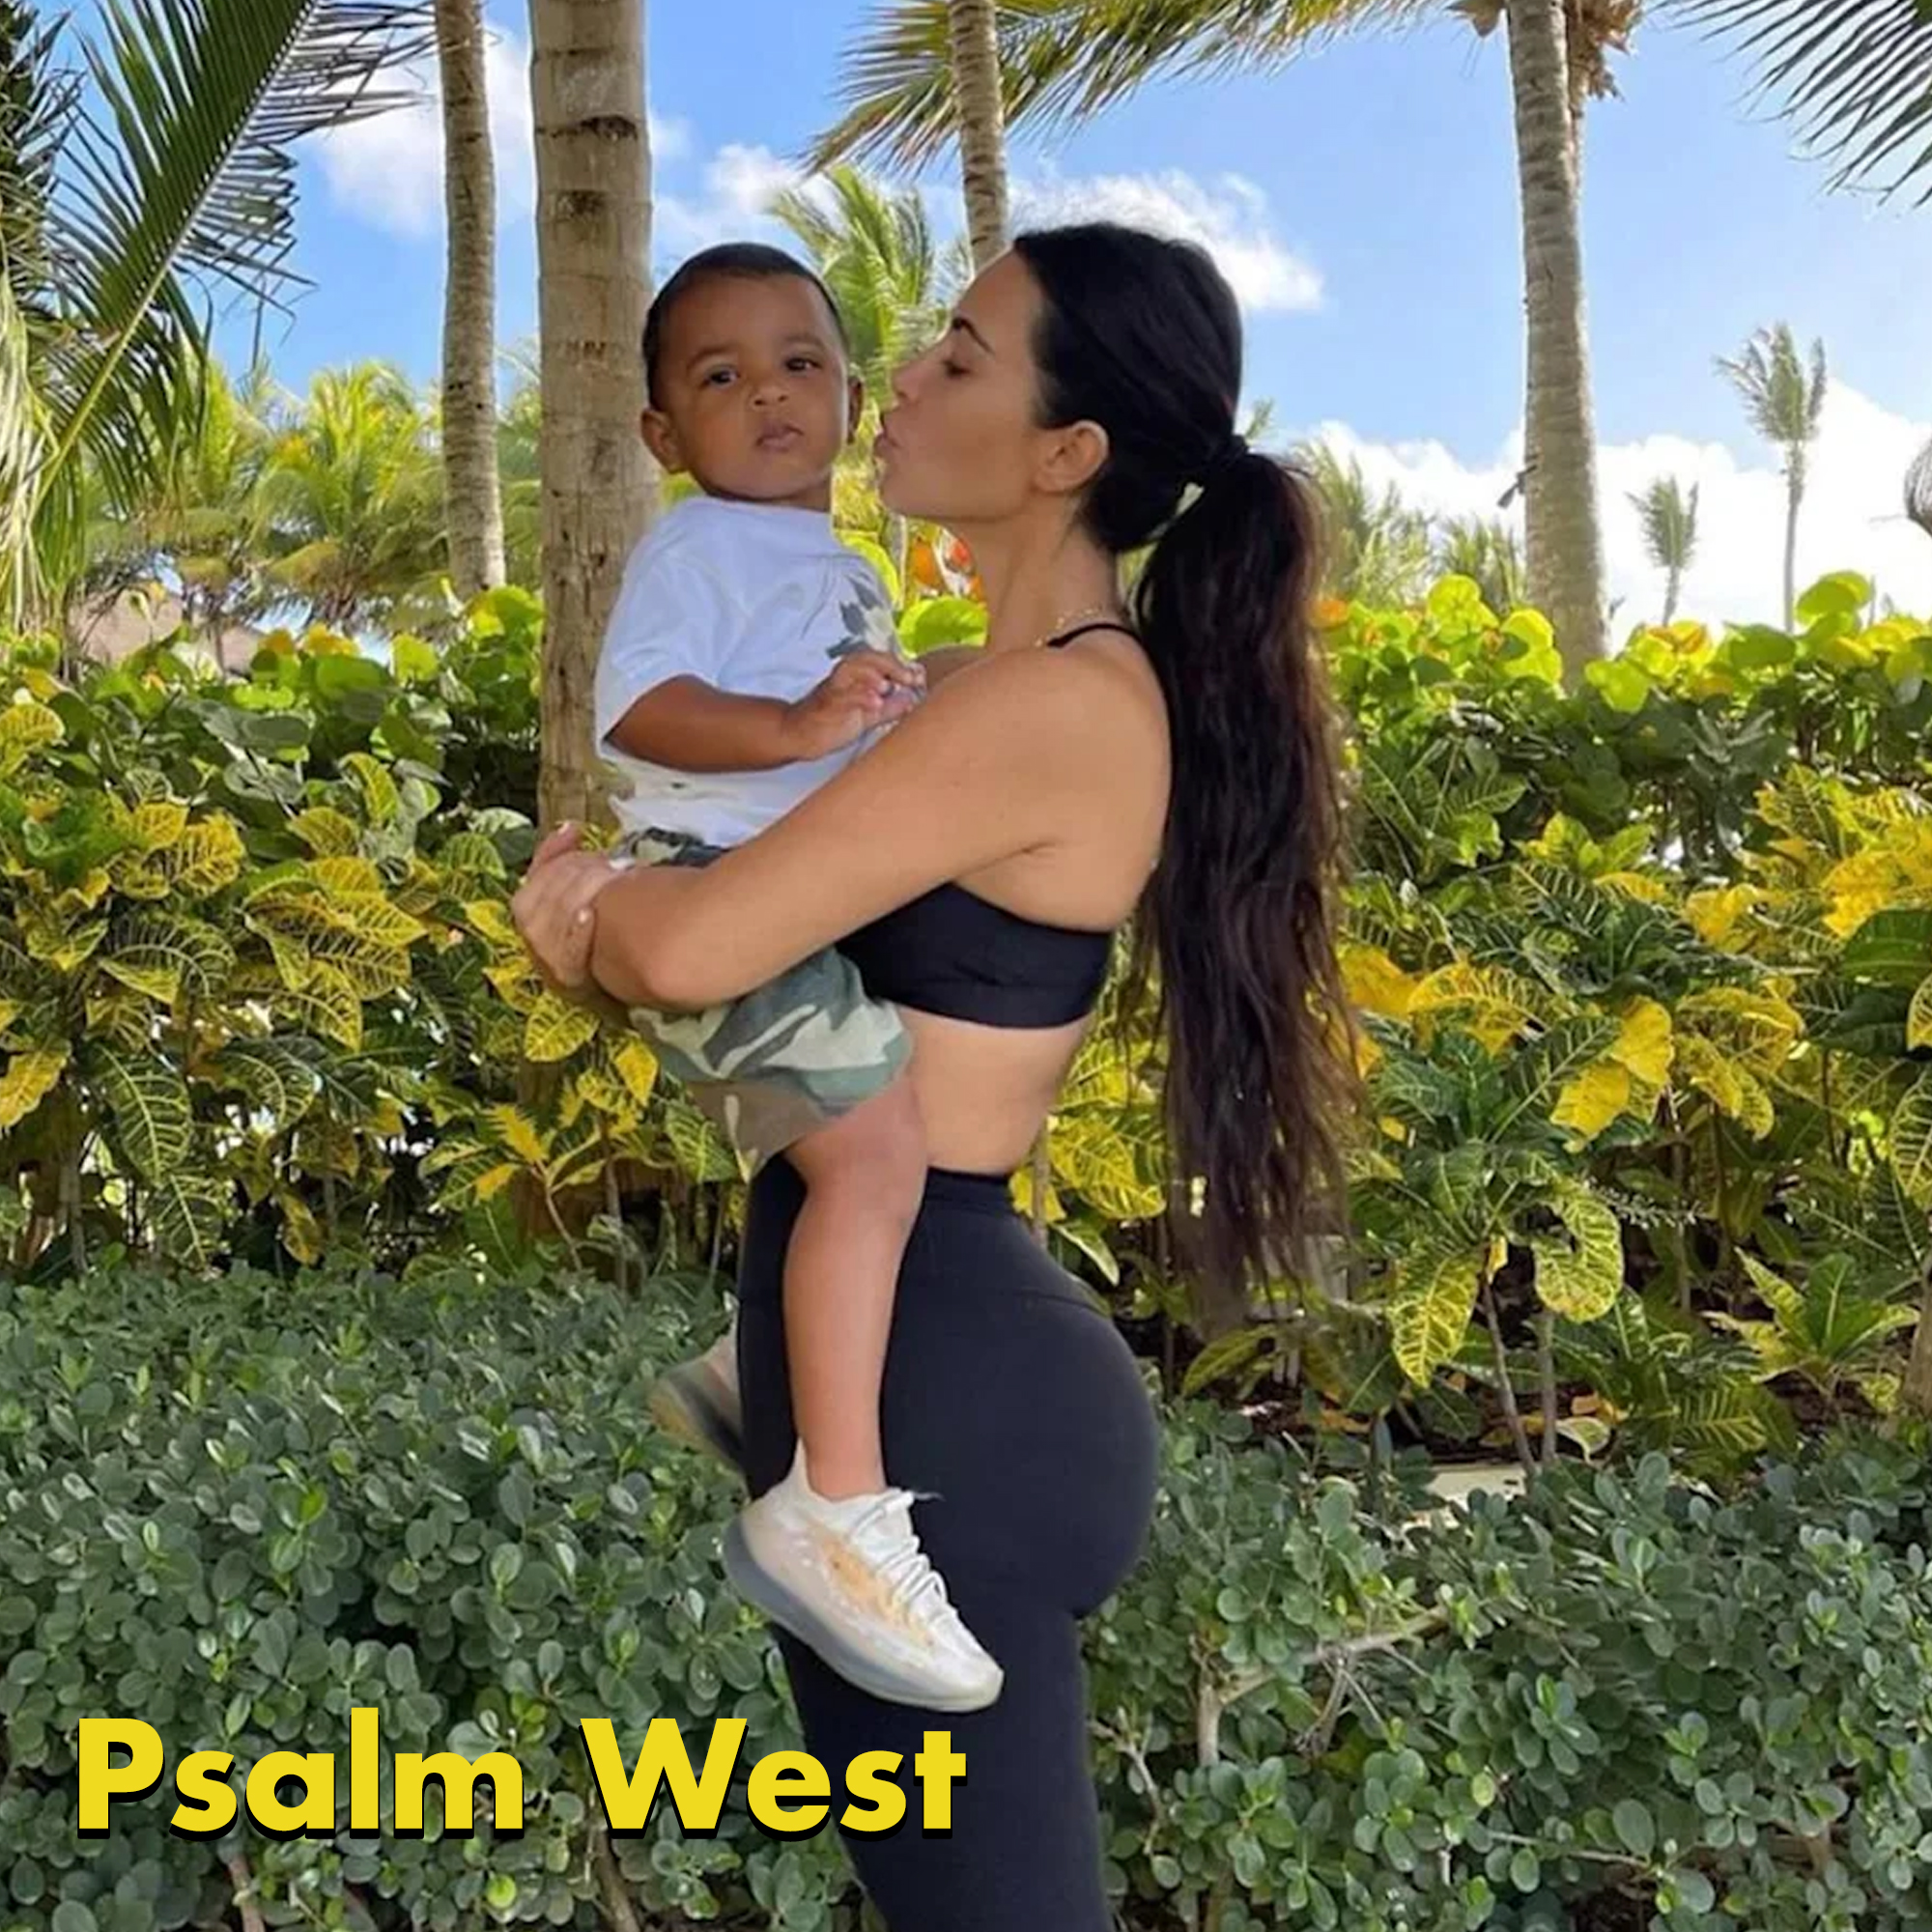 Terrible celeb baby names -kim removed bum fillers - Psalm West